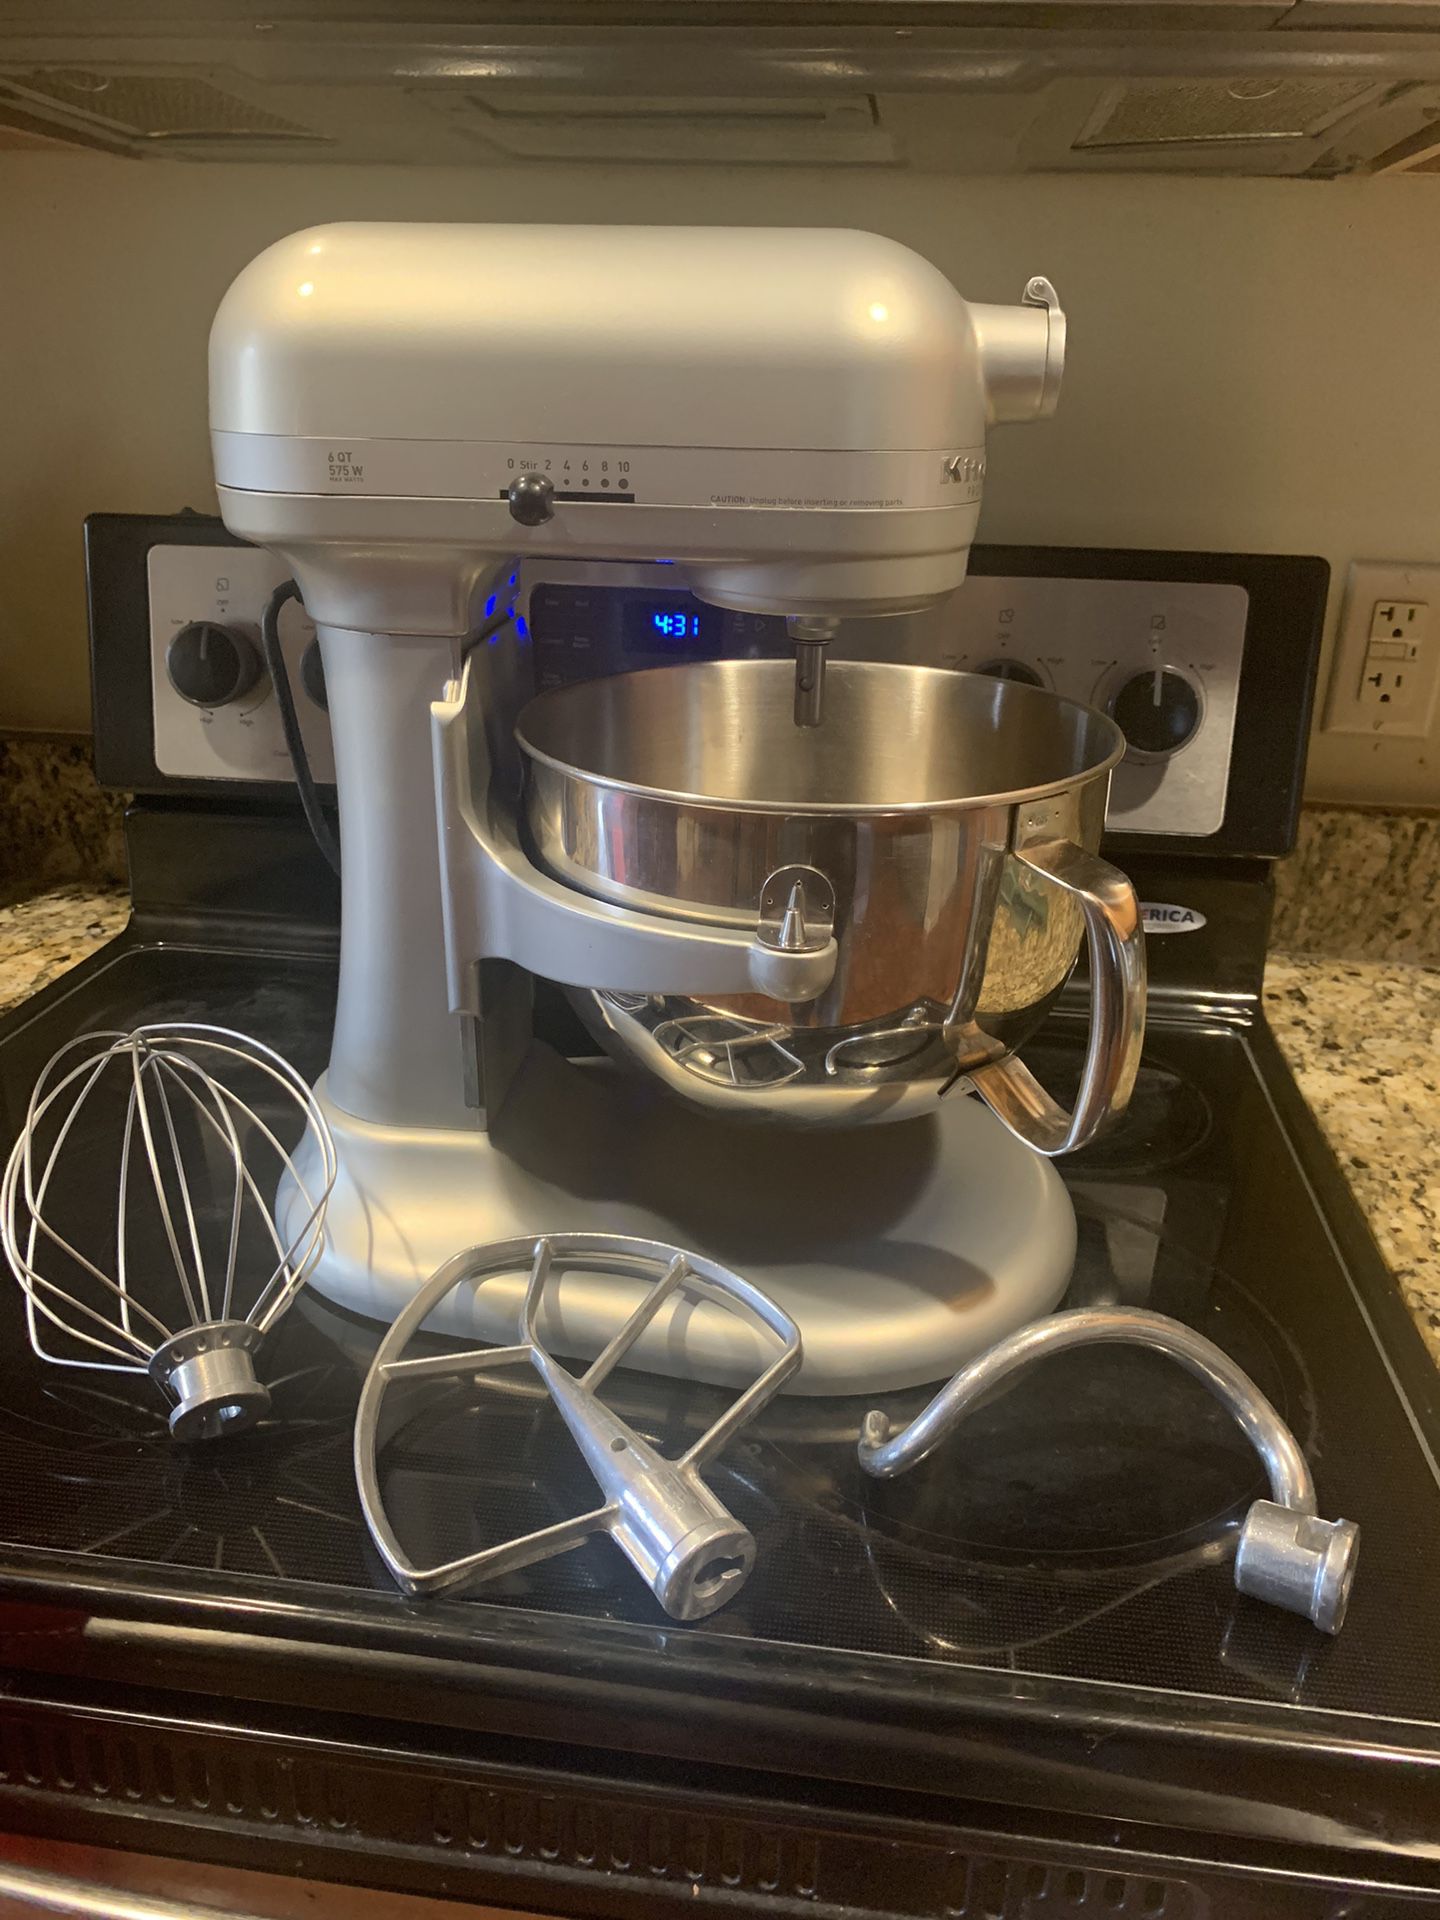 6QT KitchenAid Pro 600 Bowl Lift Stand Mixer for Sale in